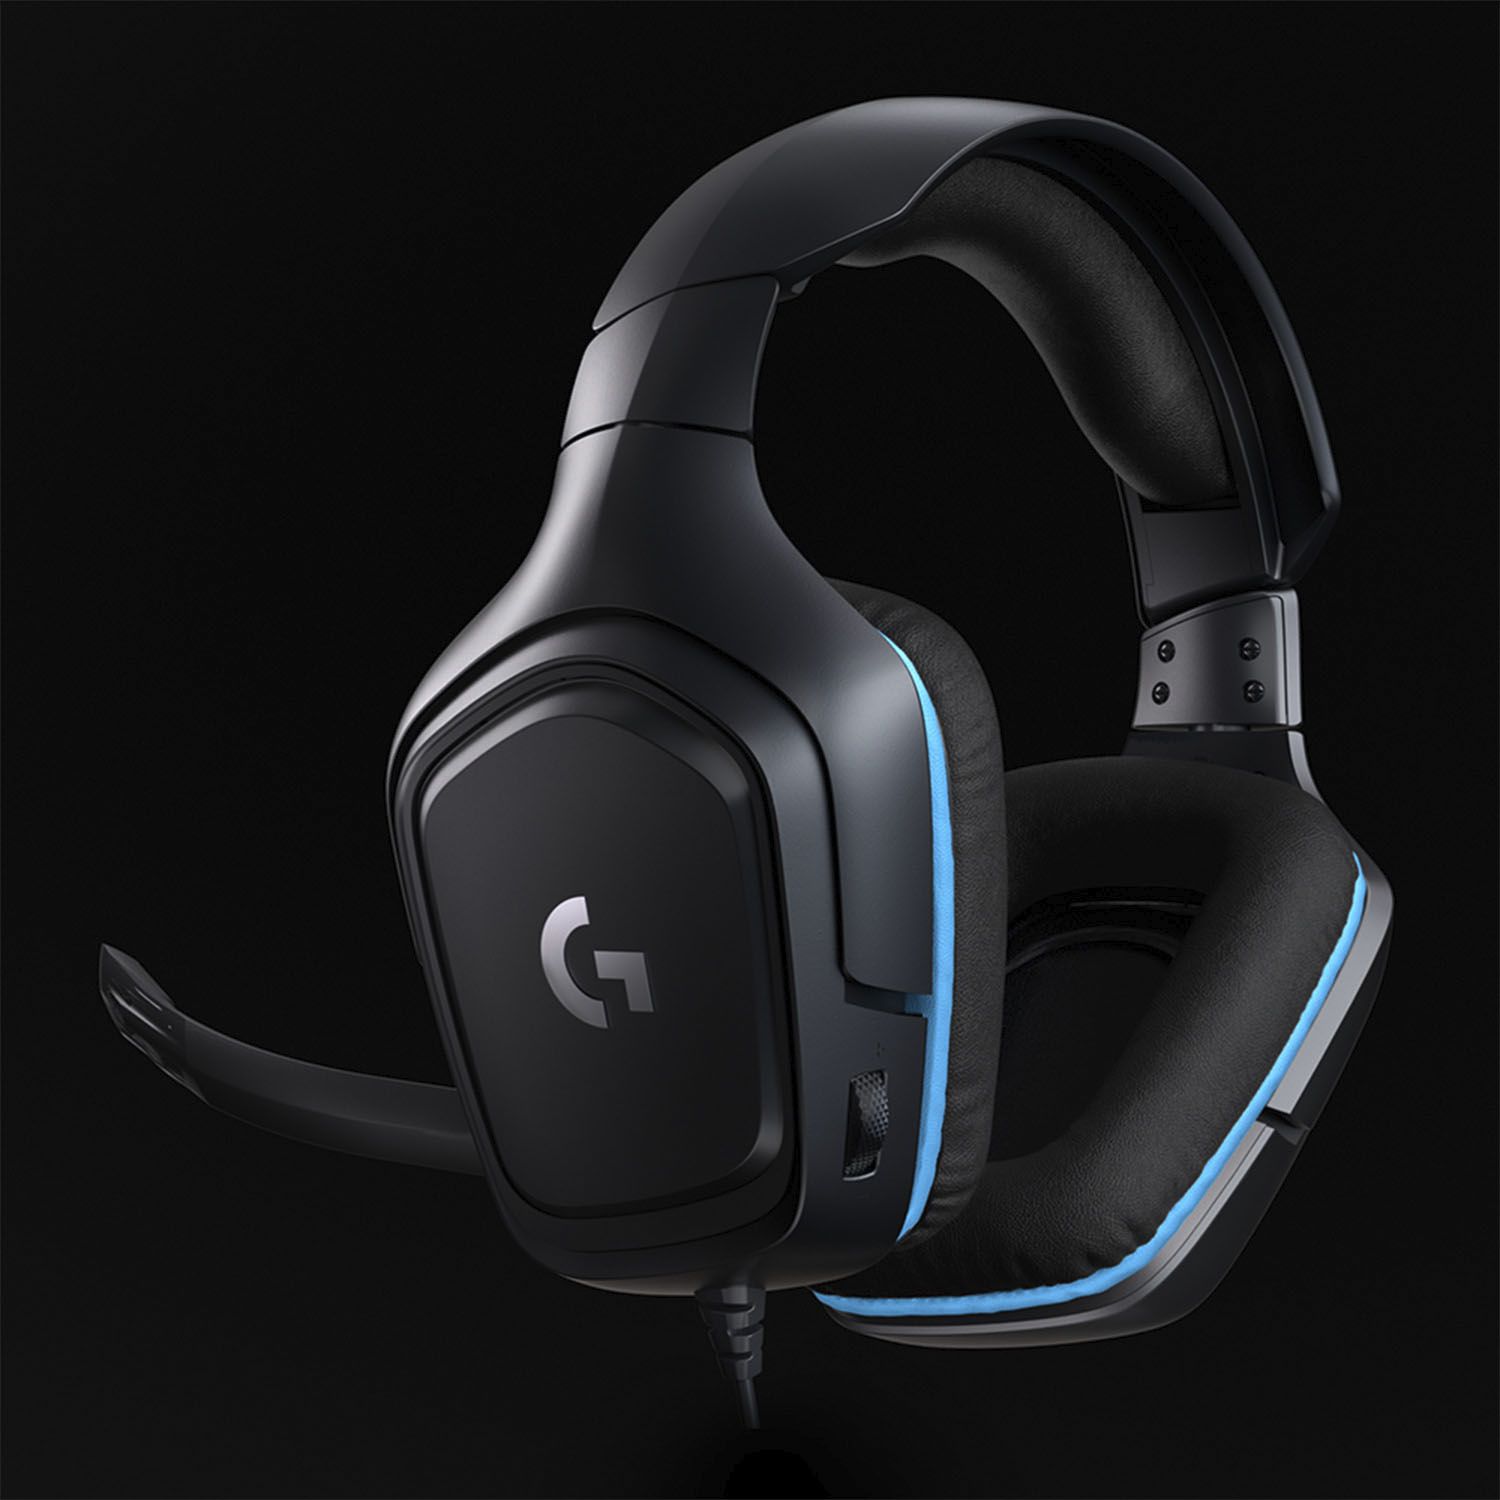 Logitech G432 Wired 7.1 Surround Sound Gaming Headset for PC Black/Blue 981-000769 - Best Buy | Best Buy U.S.